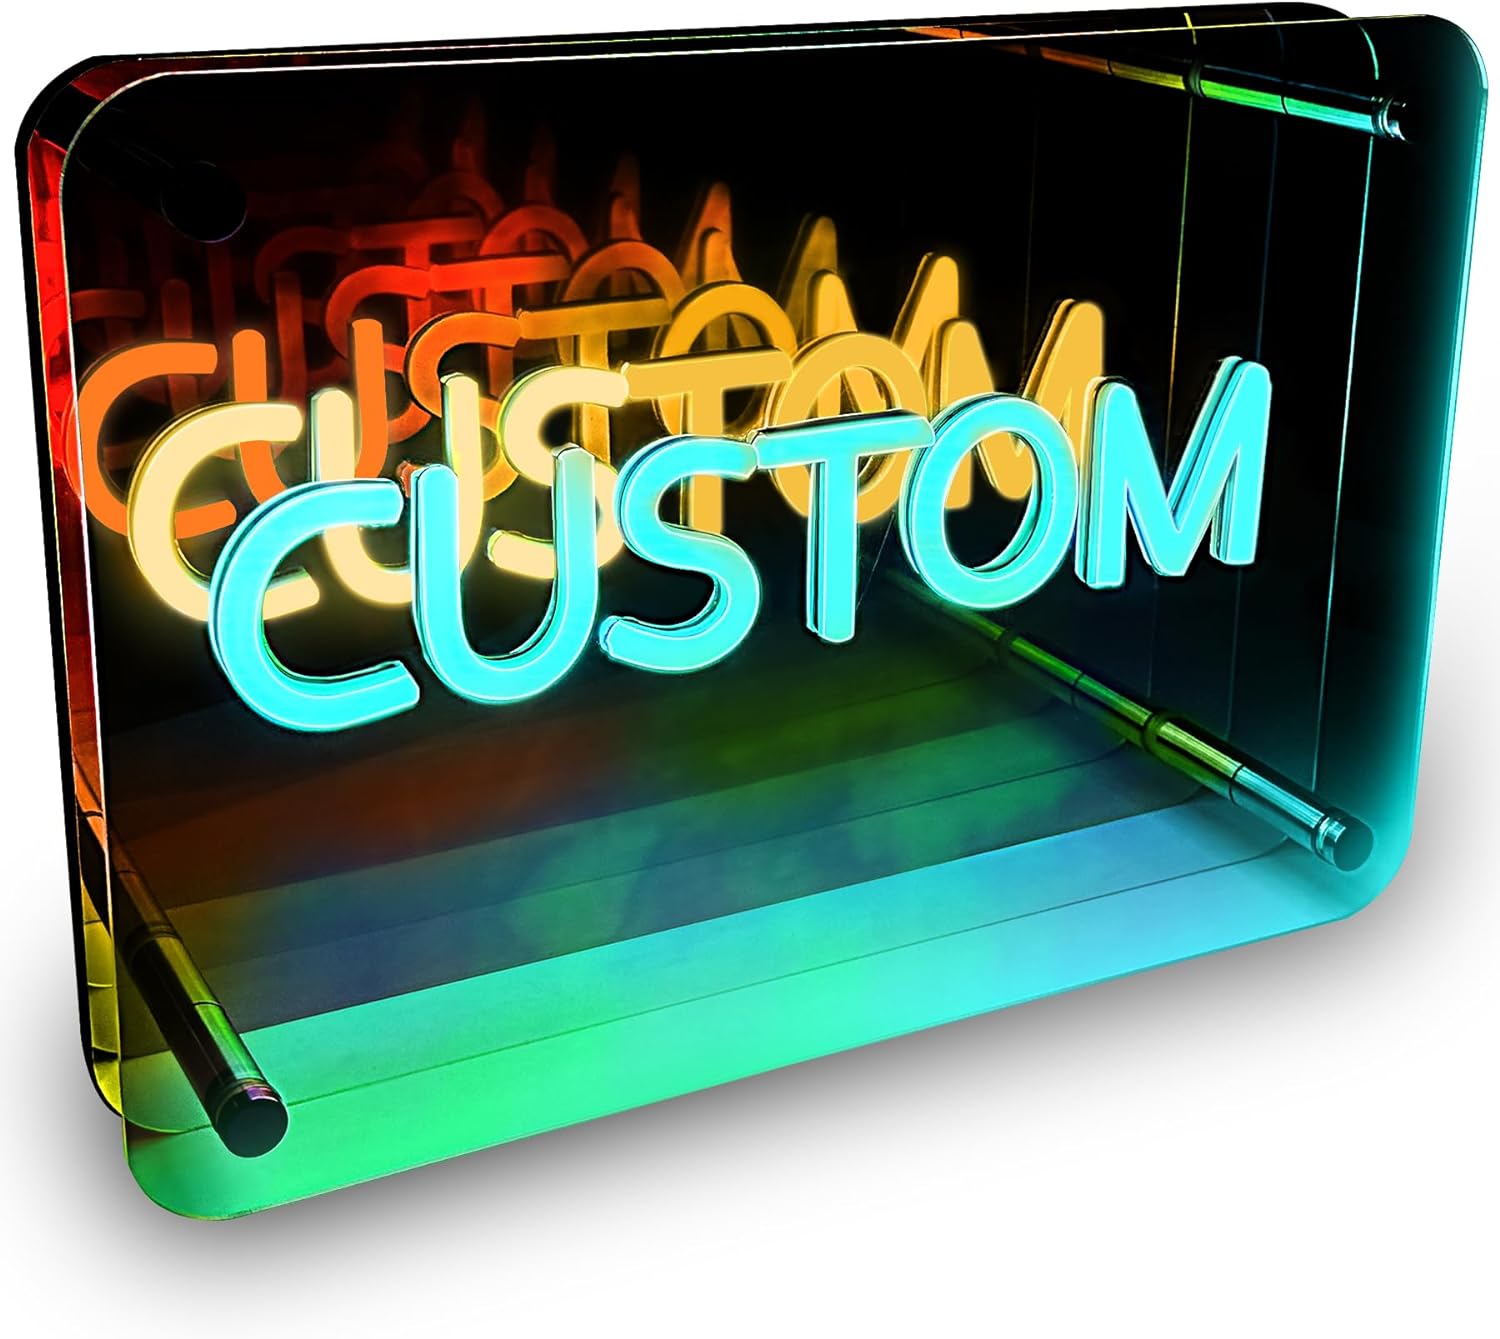 Custom Infinity Mirror Light Neon Signs with Colorful Thousand-Layer Vision Controller lcons